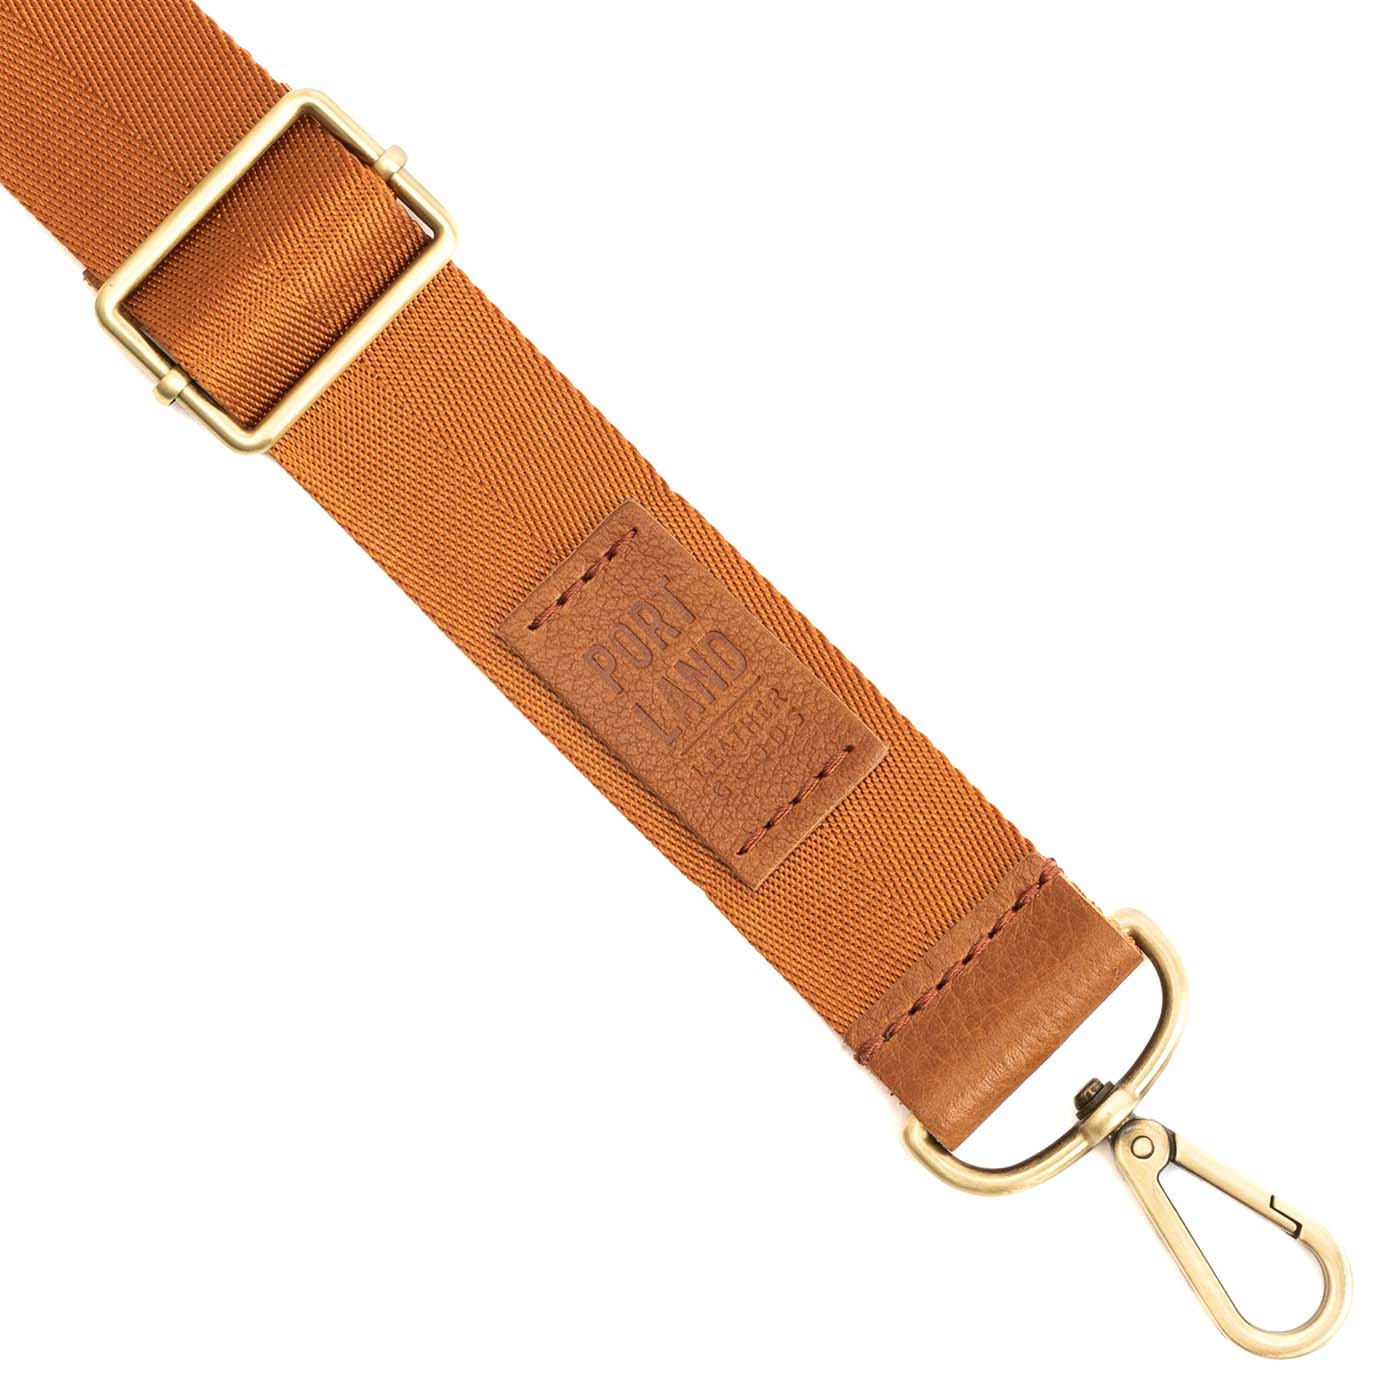 Herringbone Purse Strap, Soft Strap for Totes and Handbags, Crossbody Detachable and Adjustable Bag Strap